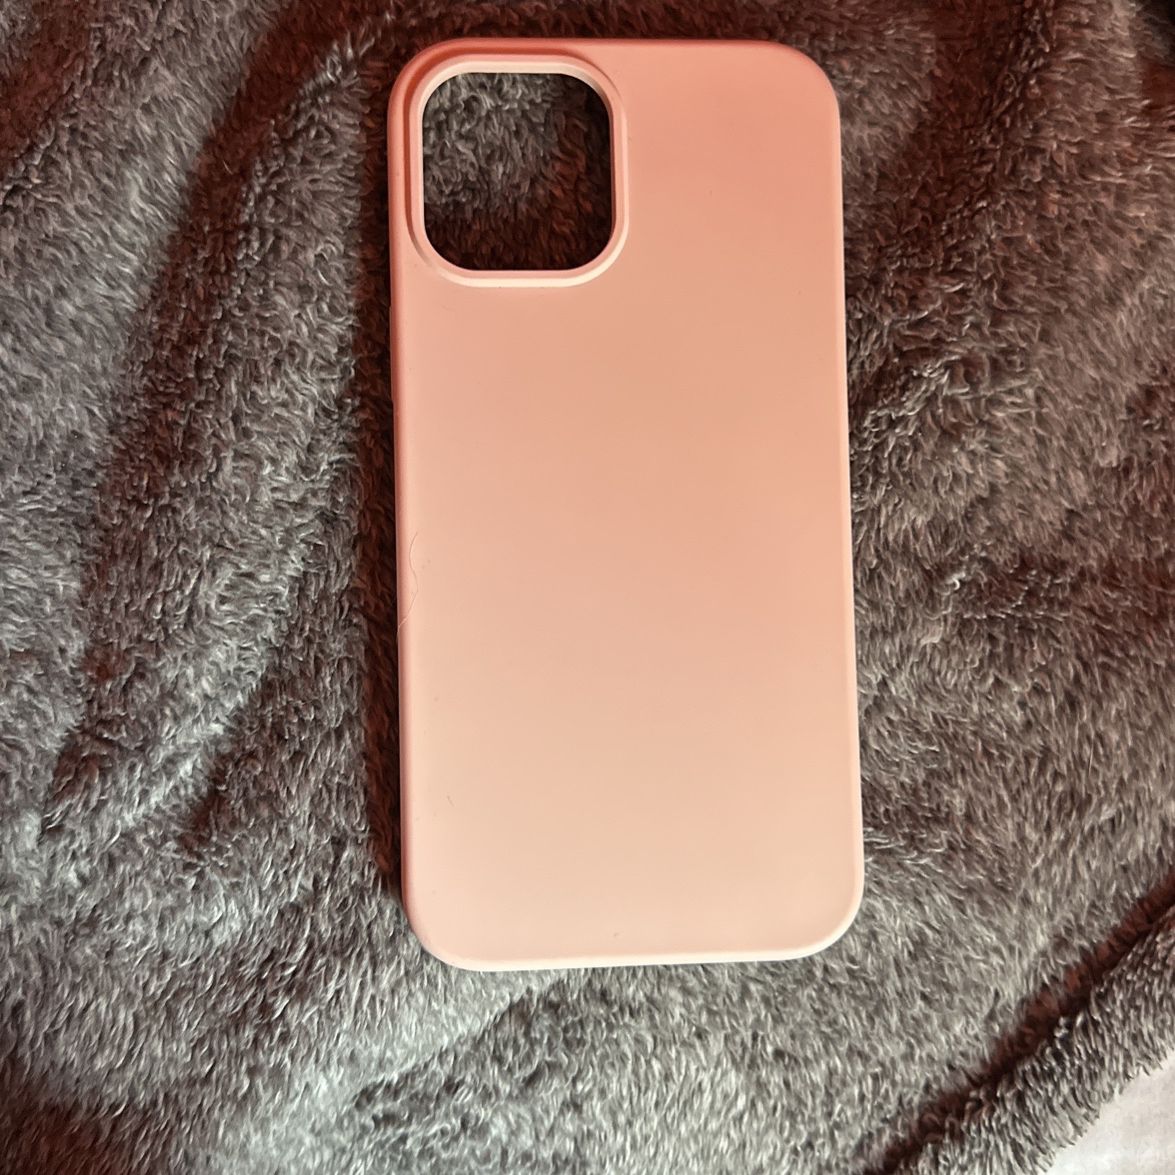 iPhone 12 Pro Max Case - Pink Chanel Box Case With Charm for Sale in  Montgomery, AL - OfferUp